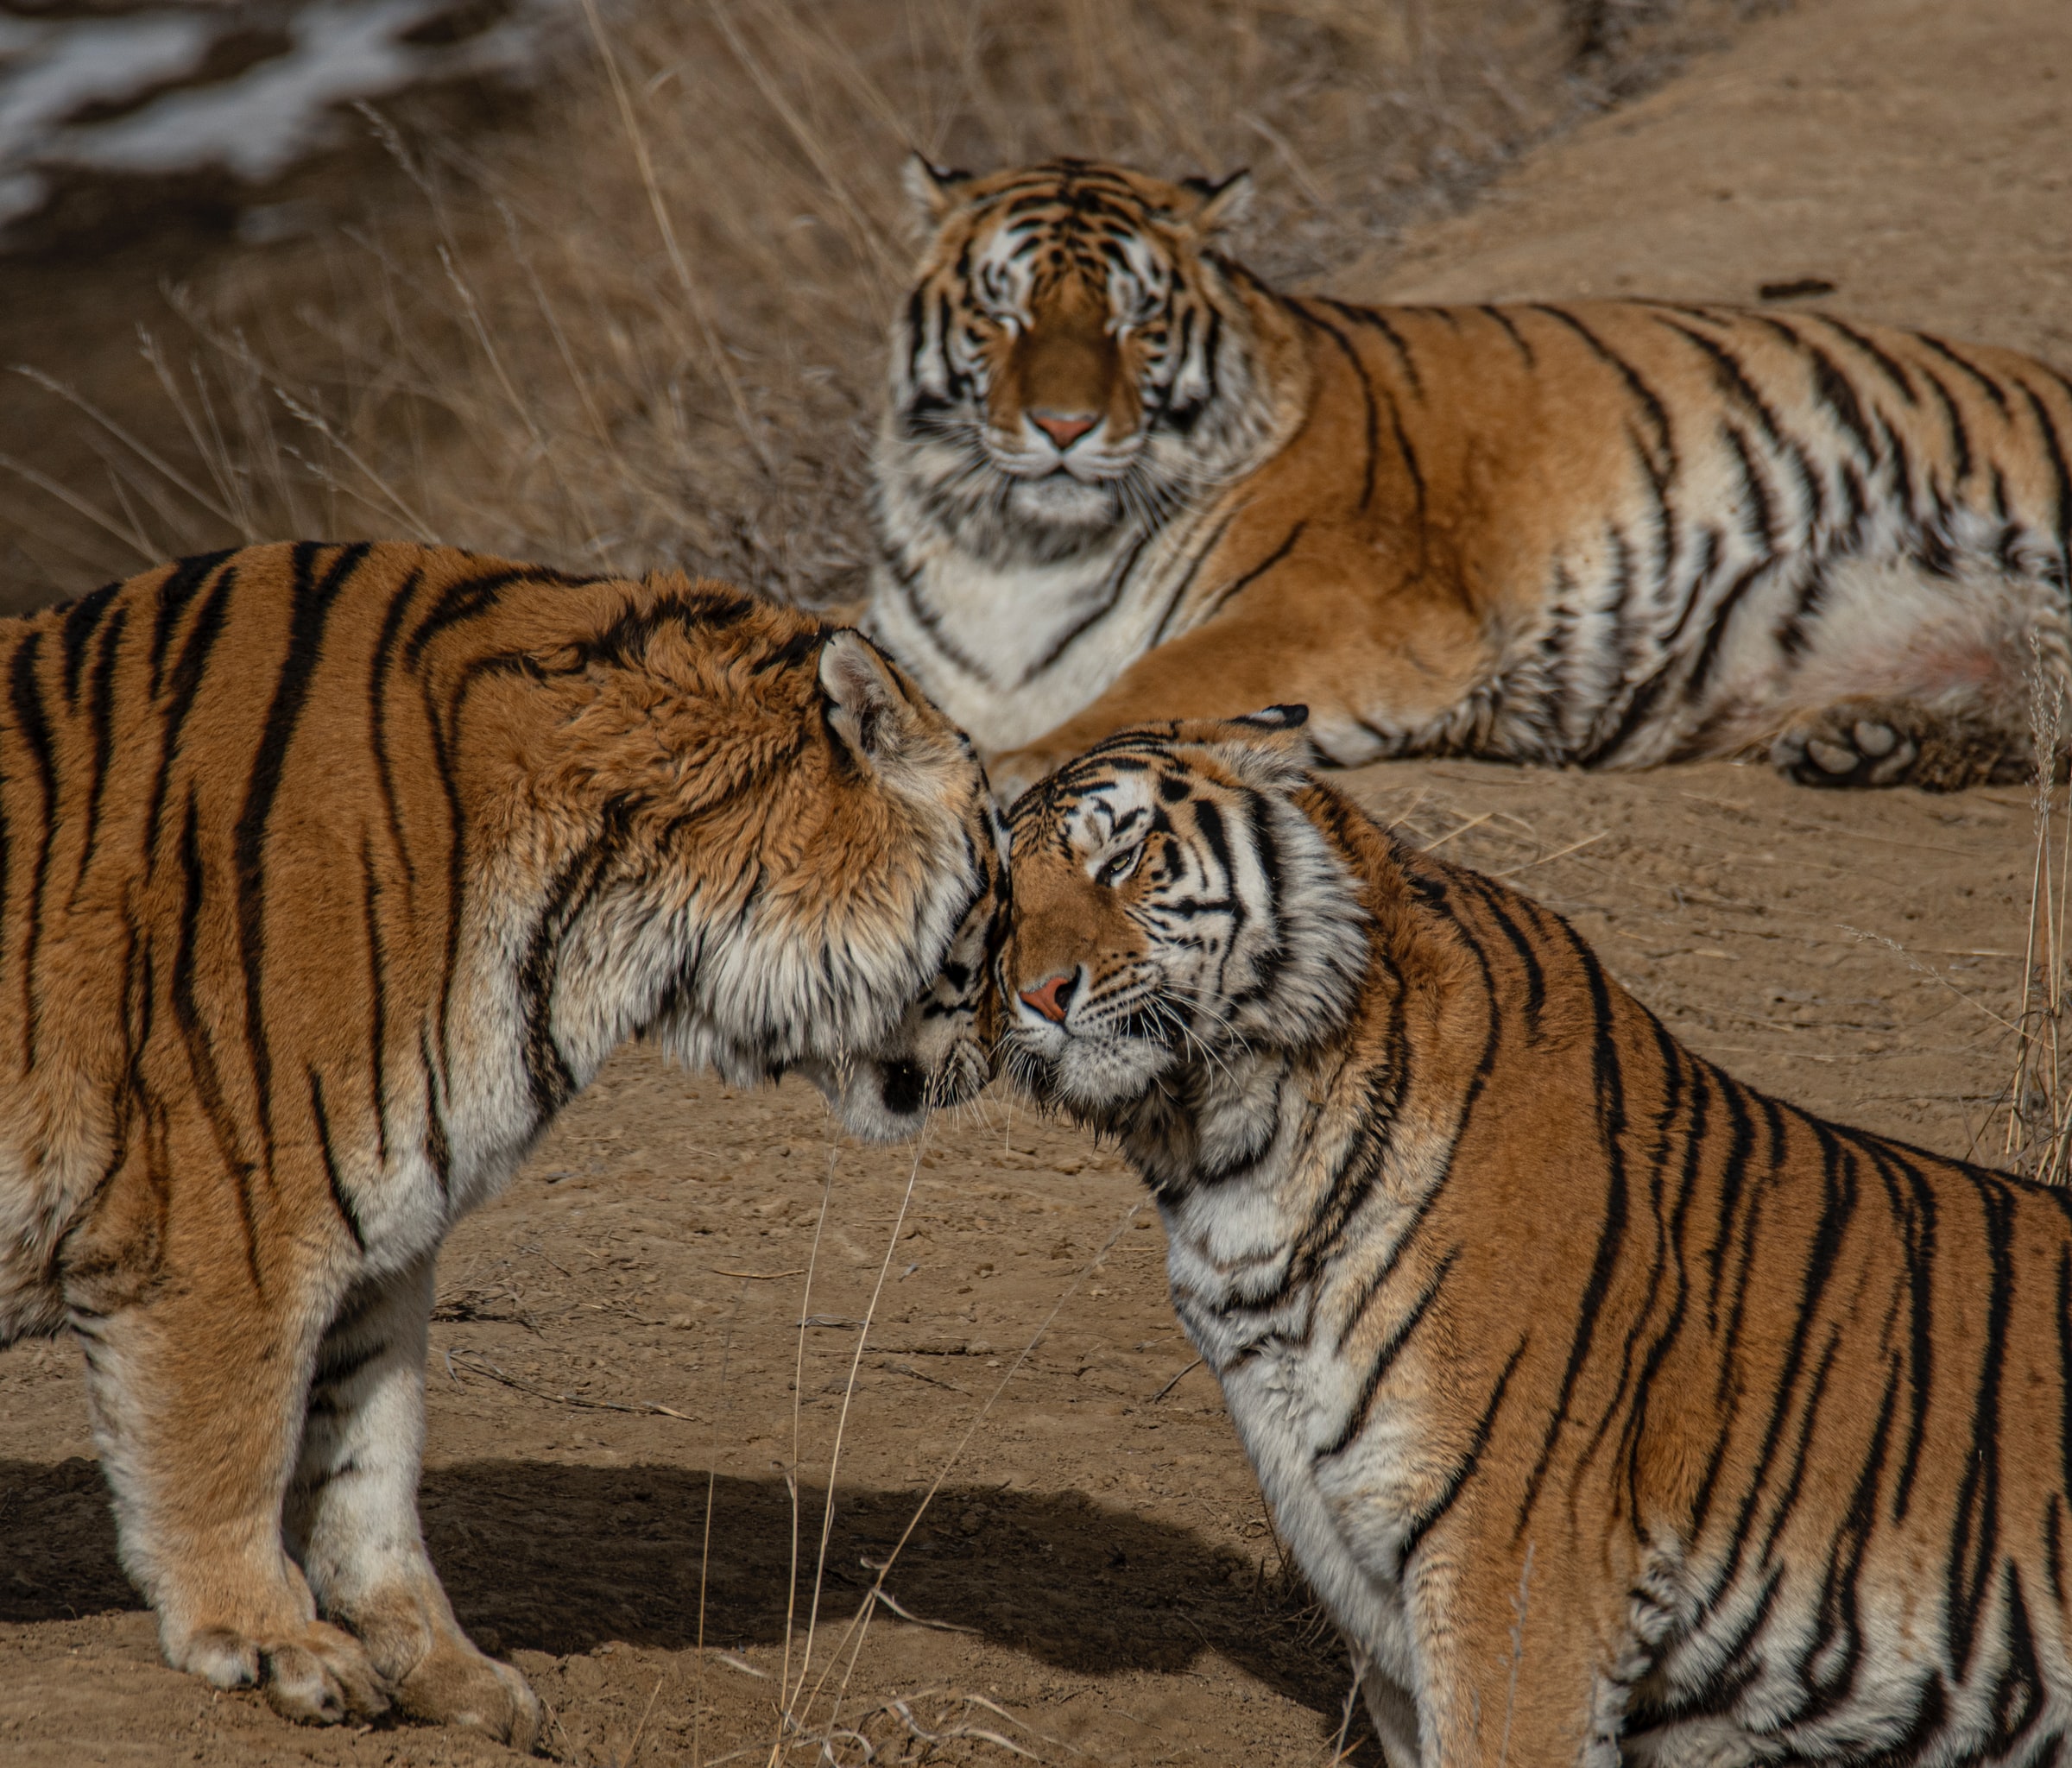 Global Tiger Day Marks Uneven Progress Towards the Global Goal to Double Wild Tigers by 2022